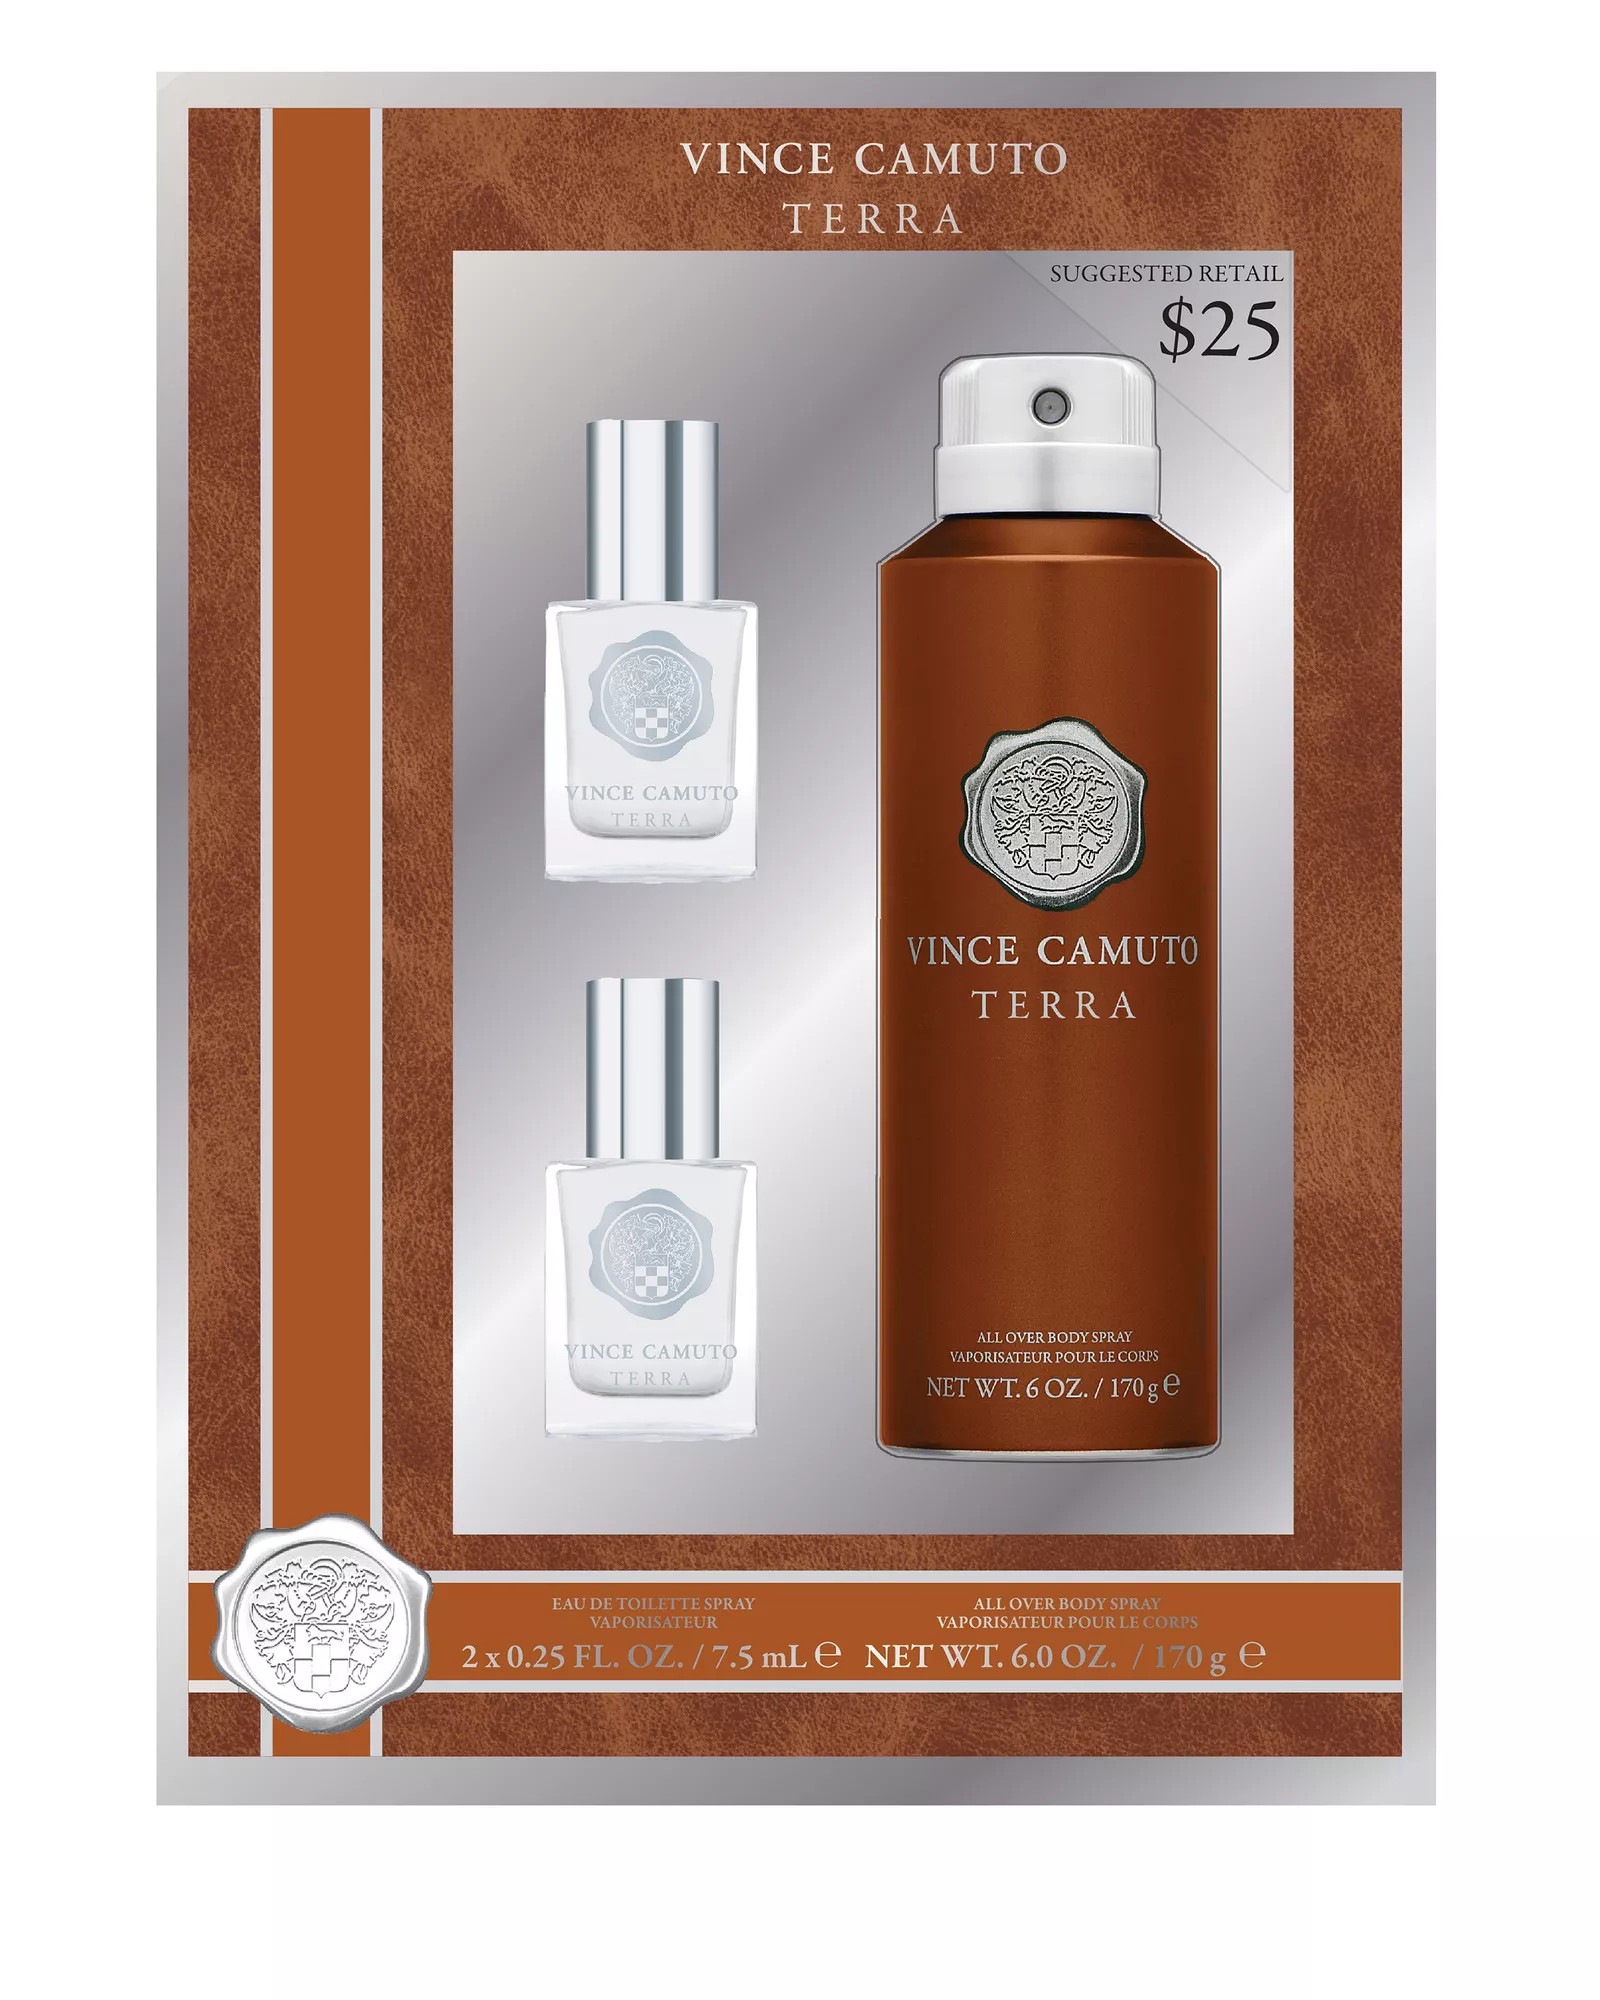 Vince Camuto Terra Eau De Toilette Spray 50ml/1.7oz buy in United States  with free shipping CosmoStore